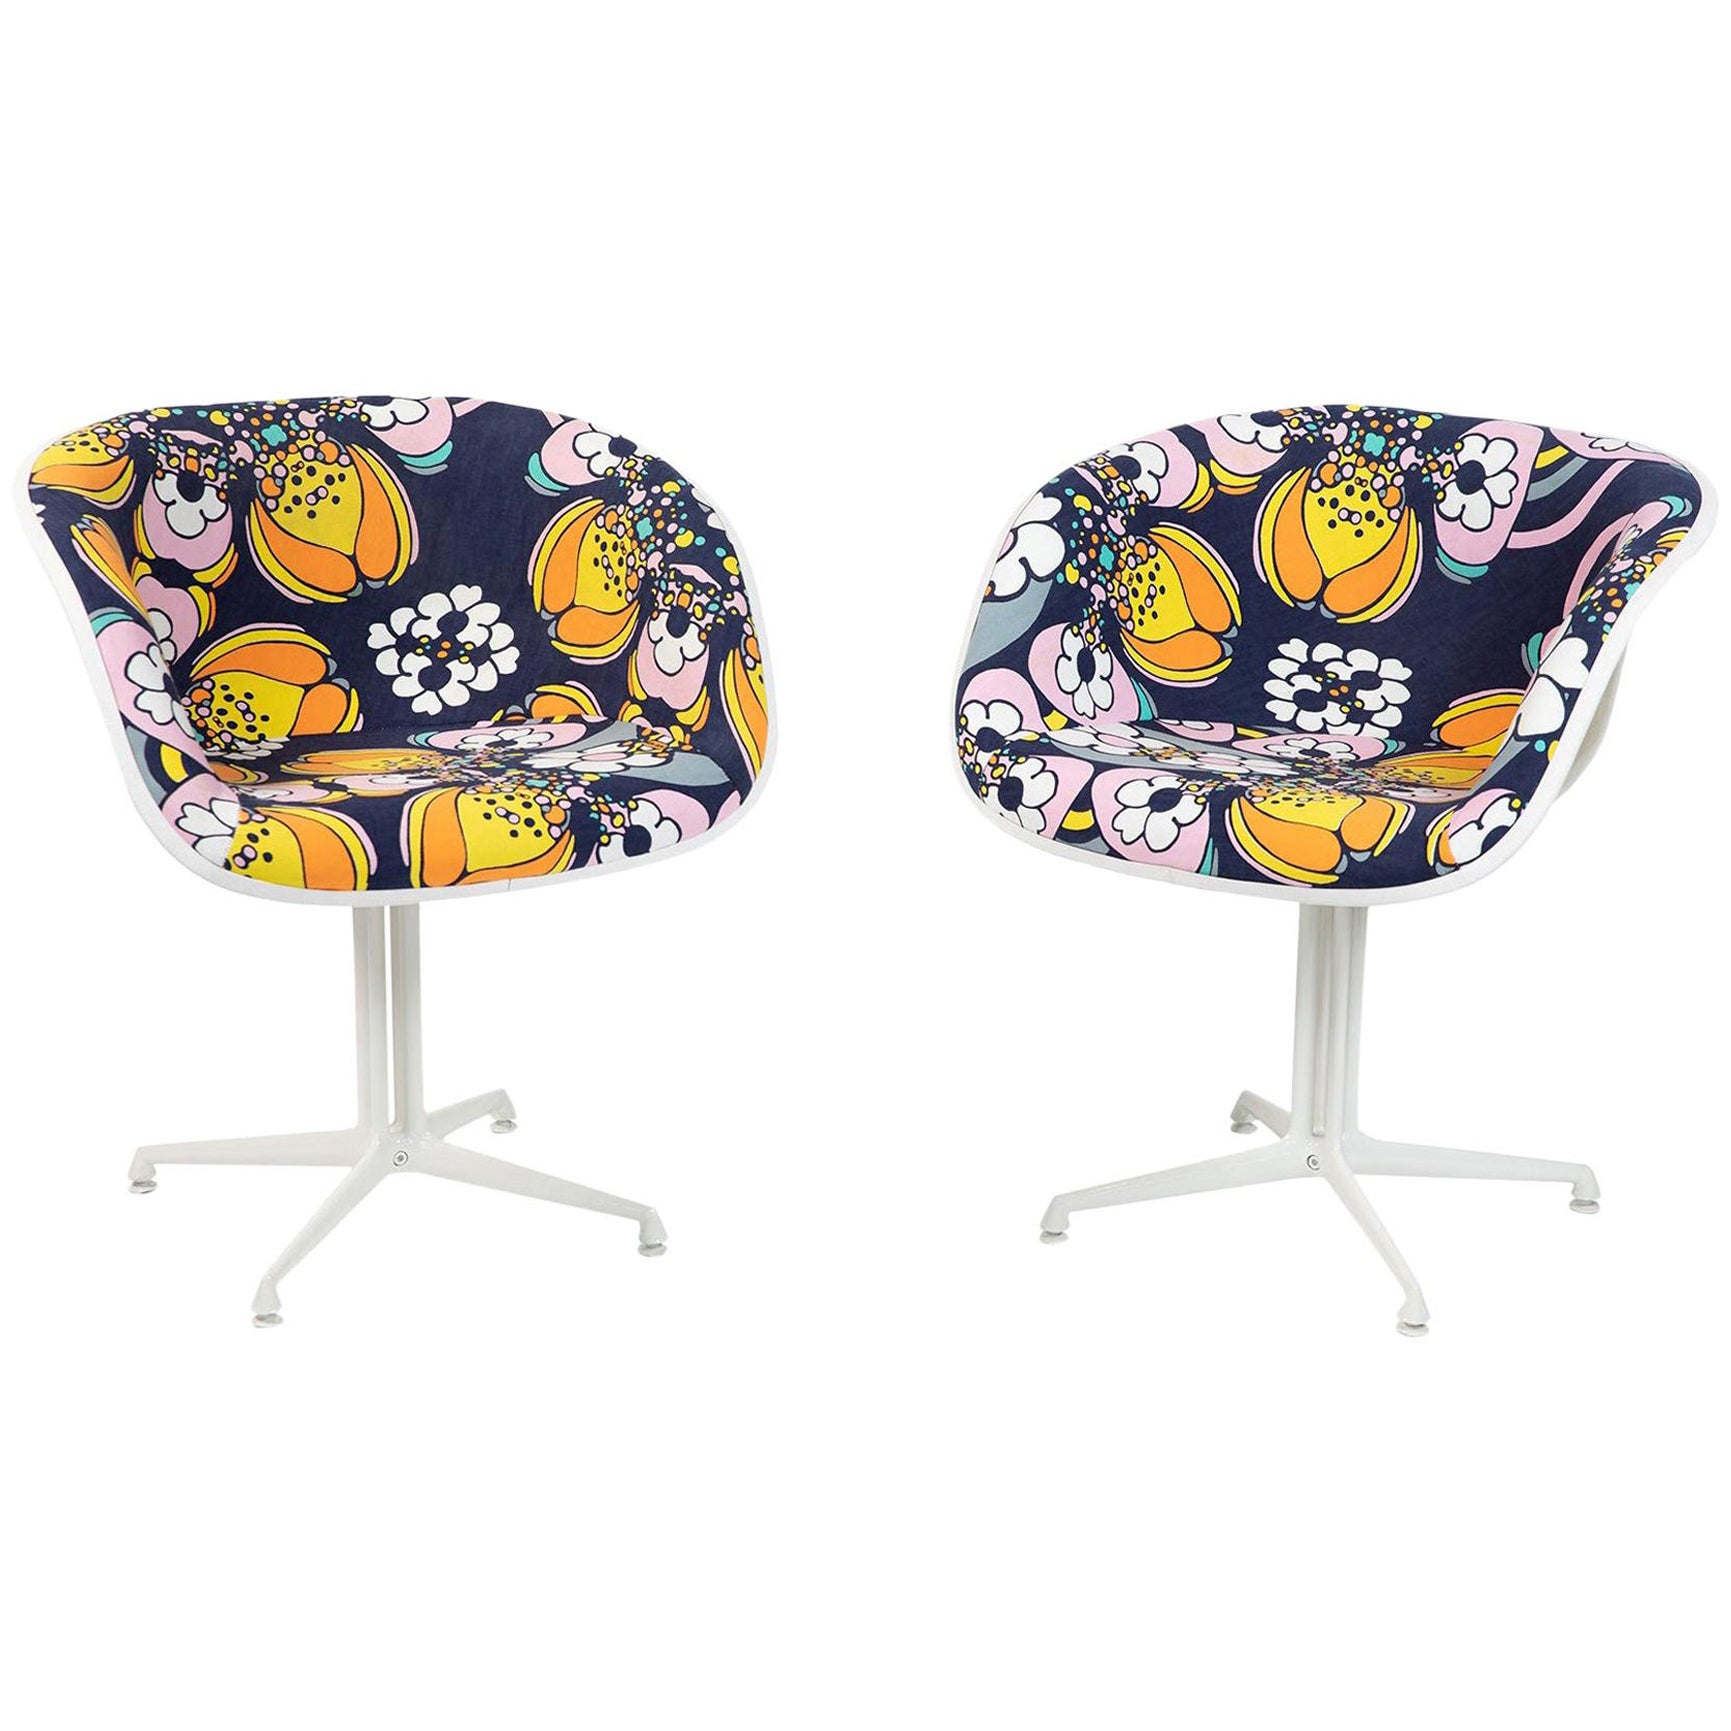 La Fonda Chairs by Eames for Herman Miller with Peter Max Fabric For Sale